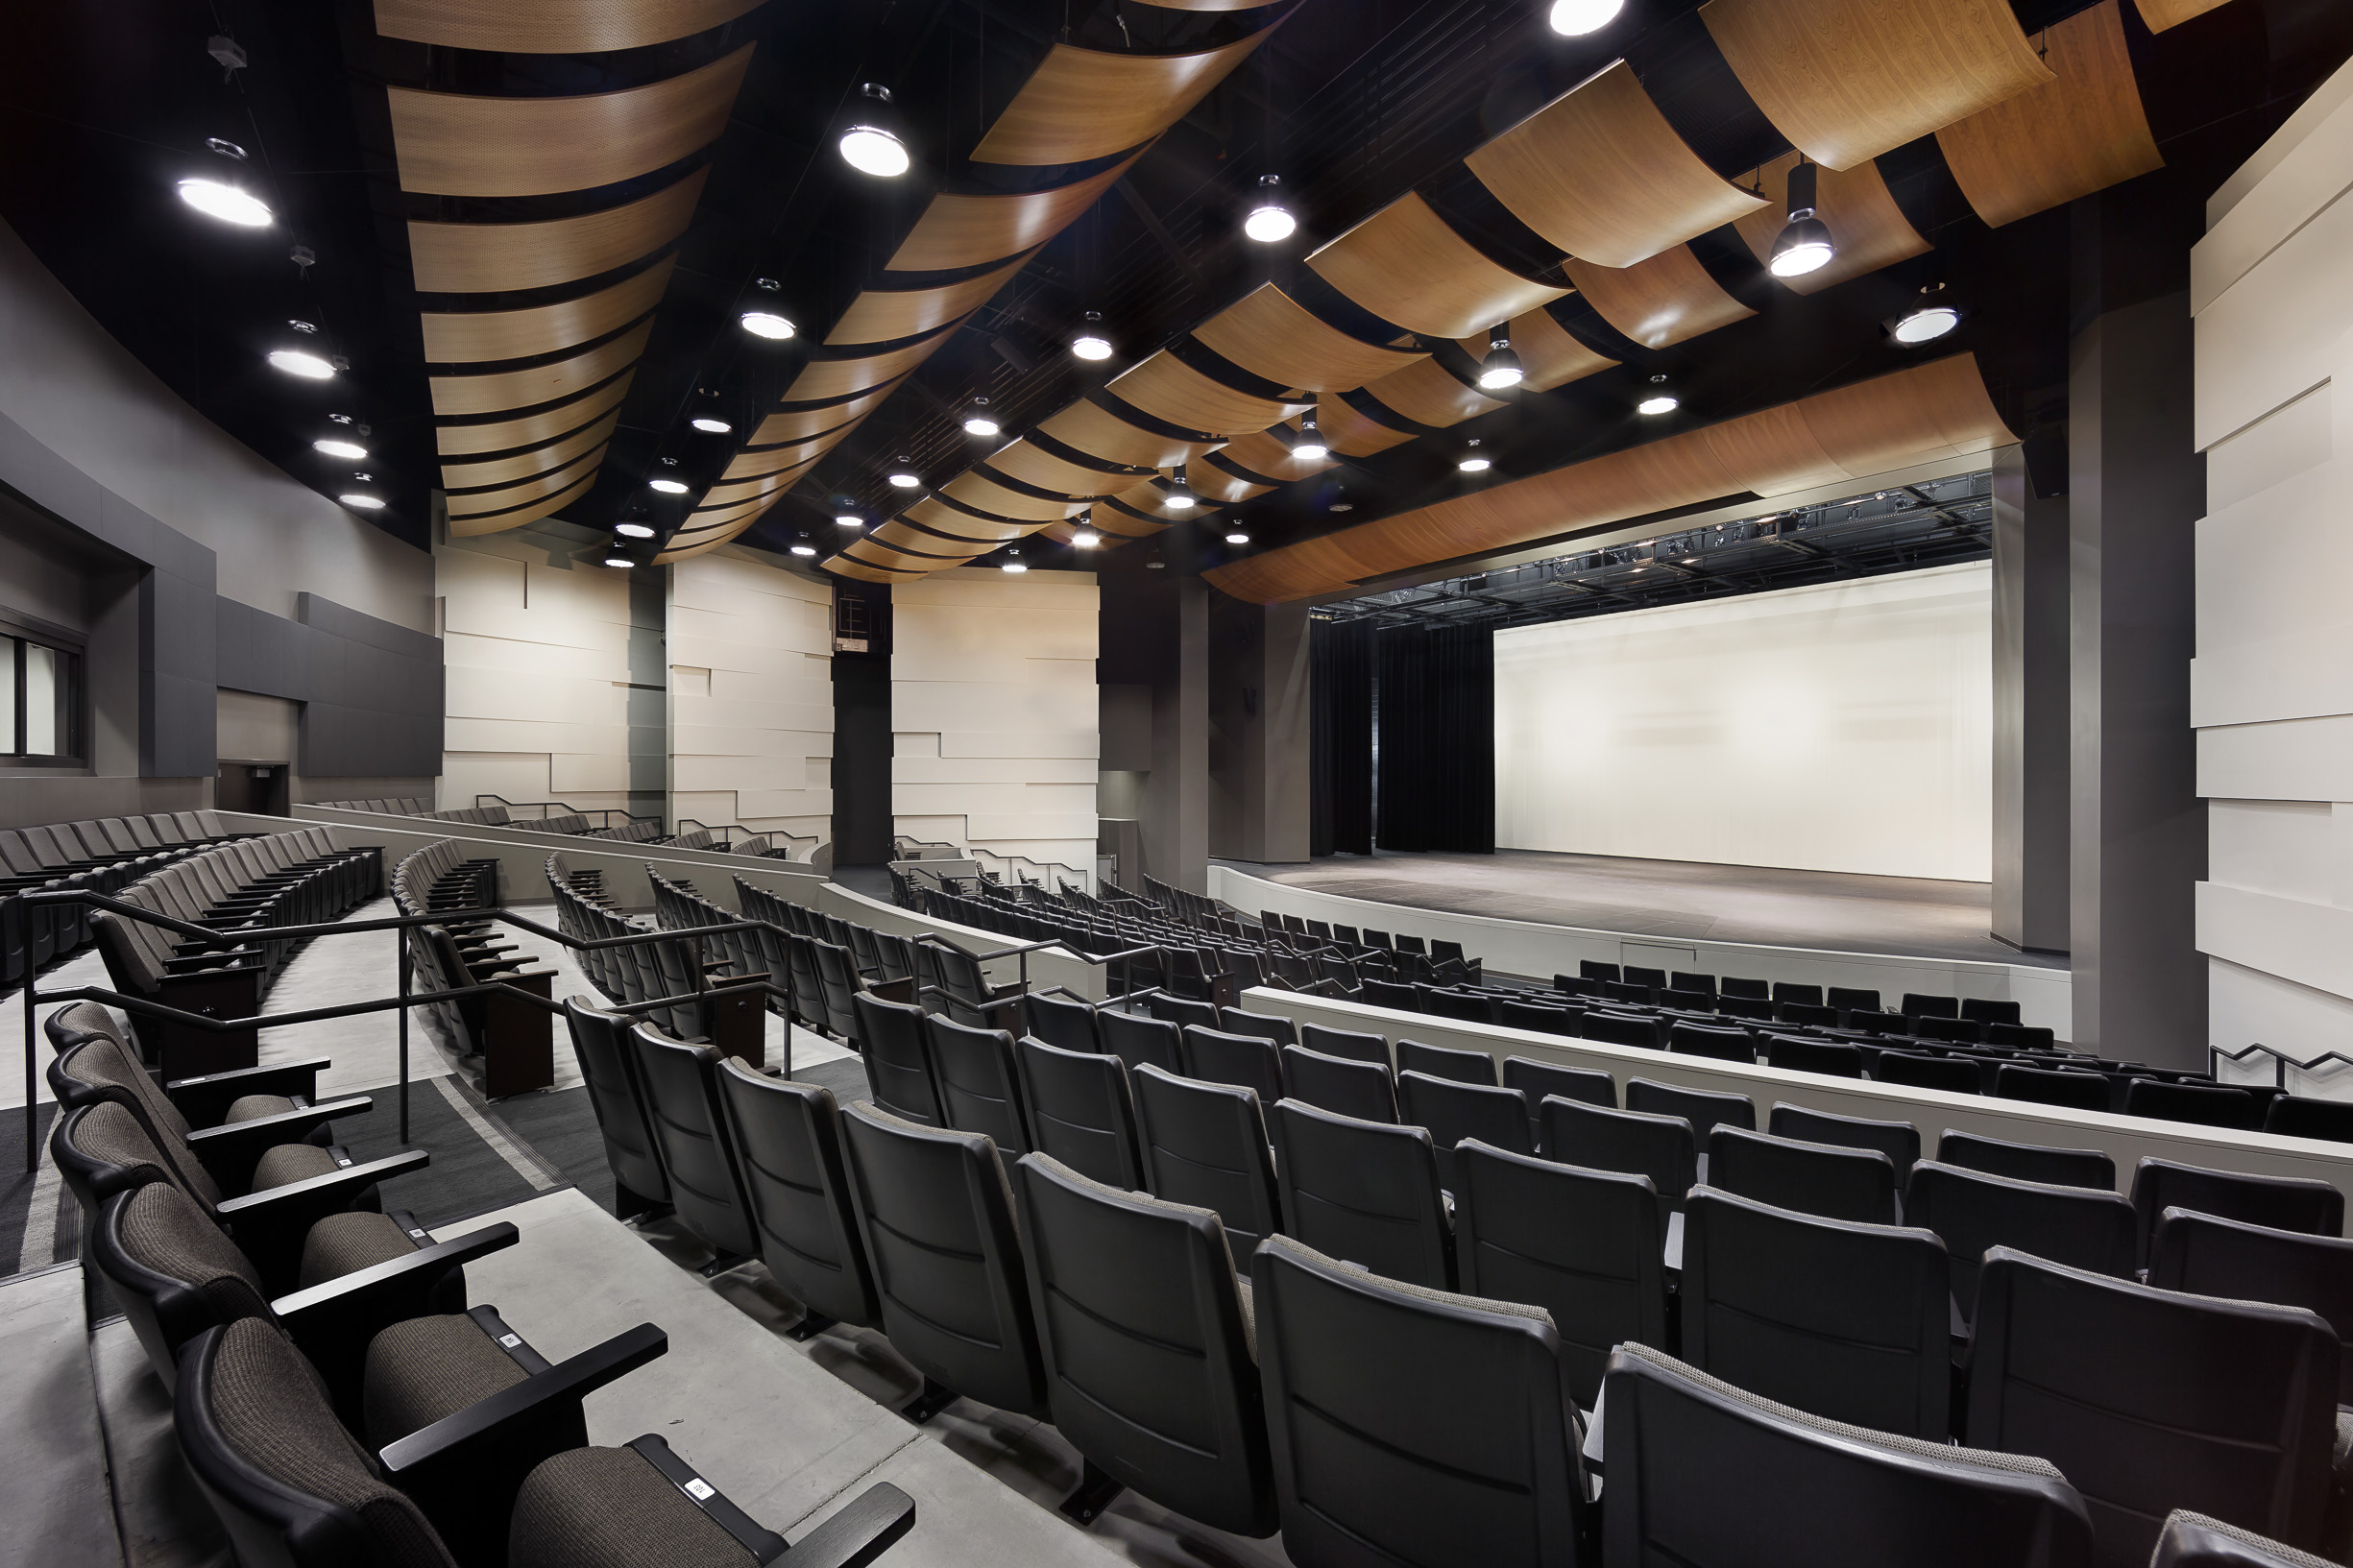 The Performing Arts Center includes a 400-seat theatre, black box theatre and support as well as teaching stations for the visual arts, media arts, band and choral.